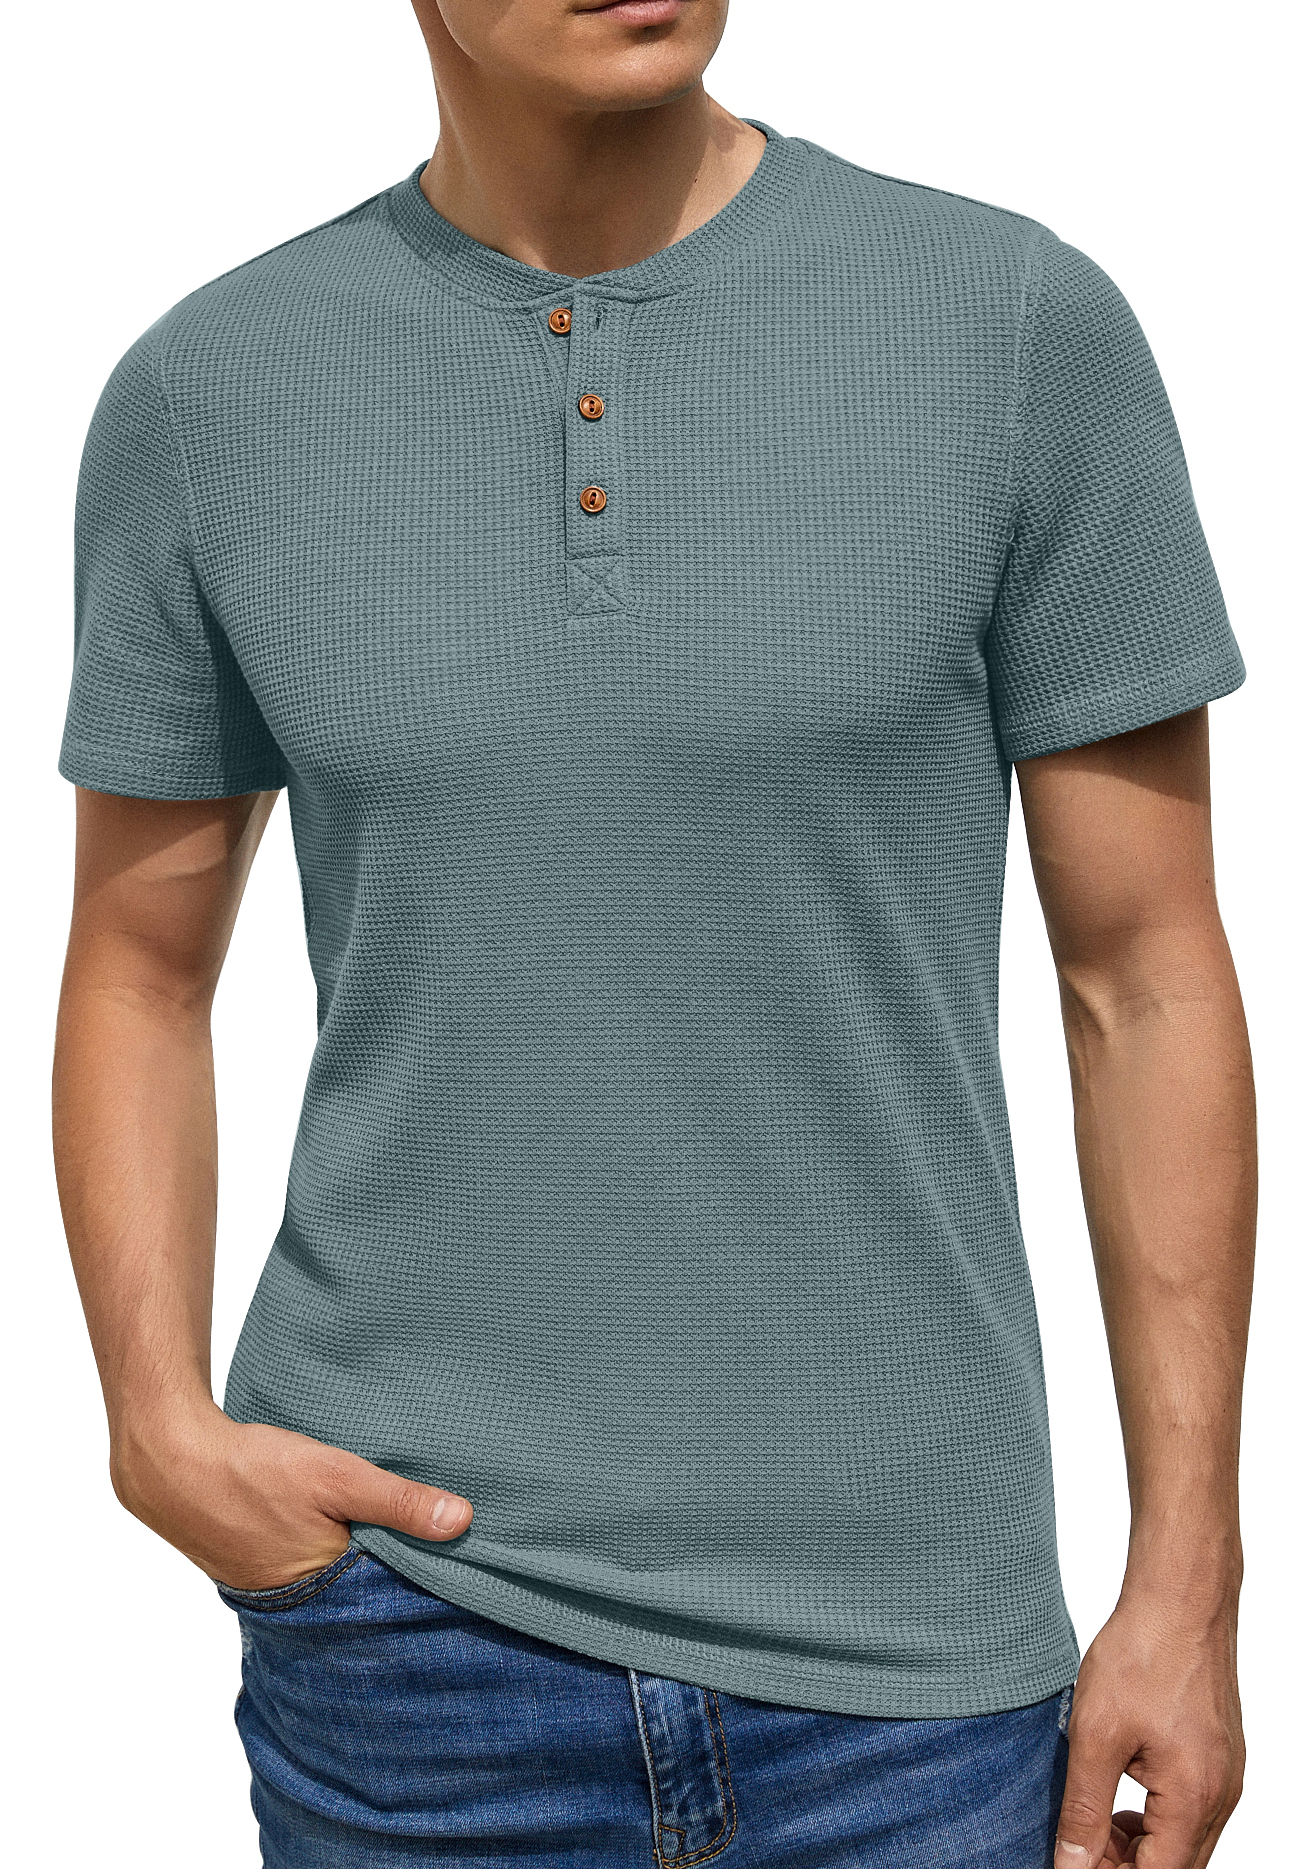 RPVATI Mens Short Sleeve Henley Shirts Casual Washed Button Down Tee ...